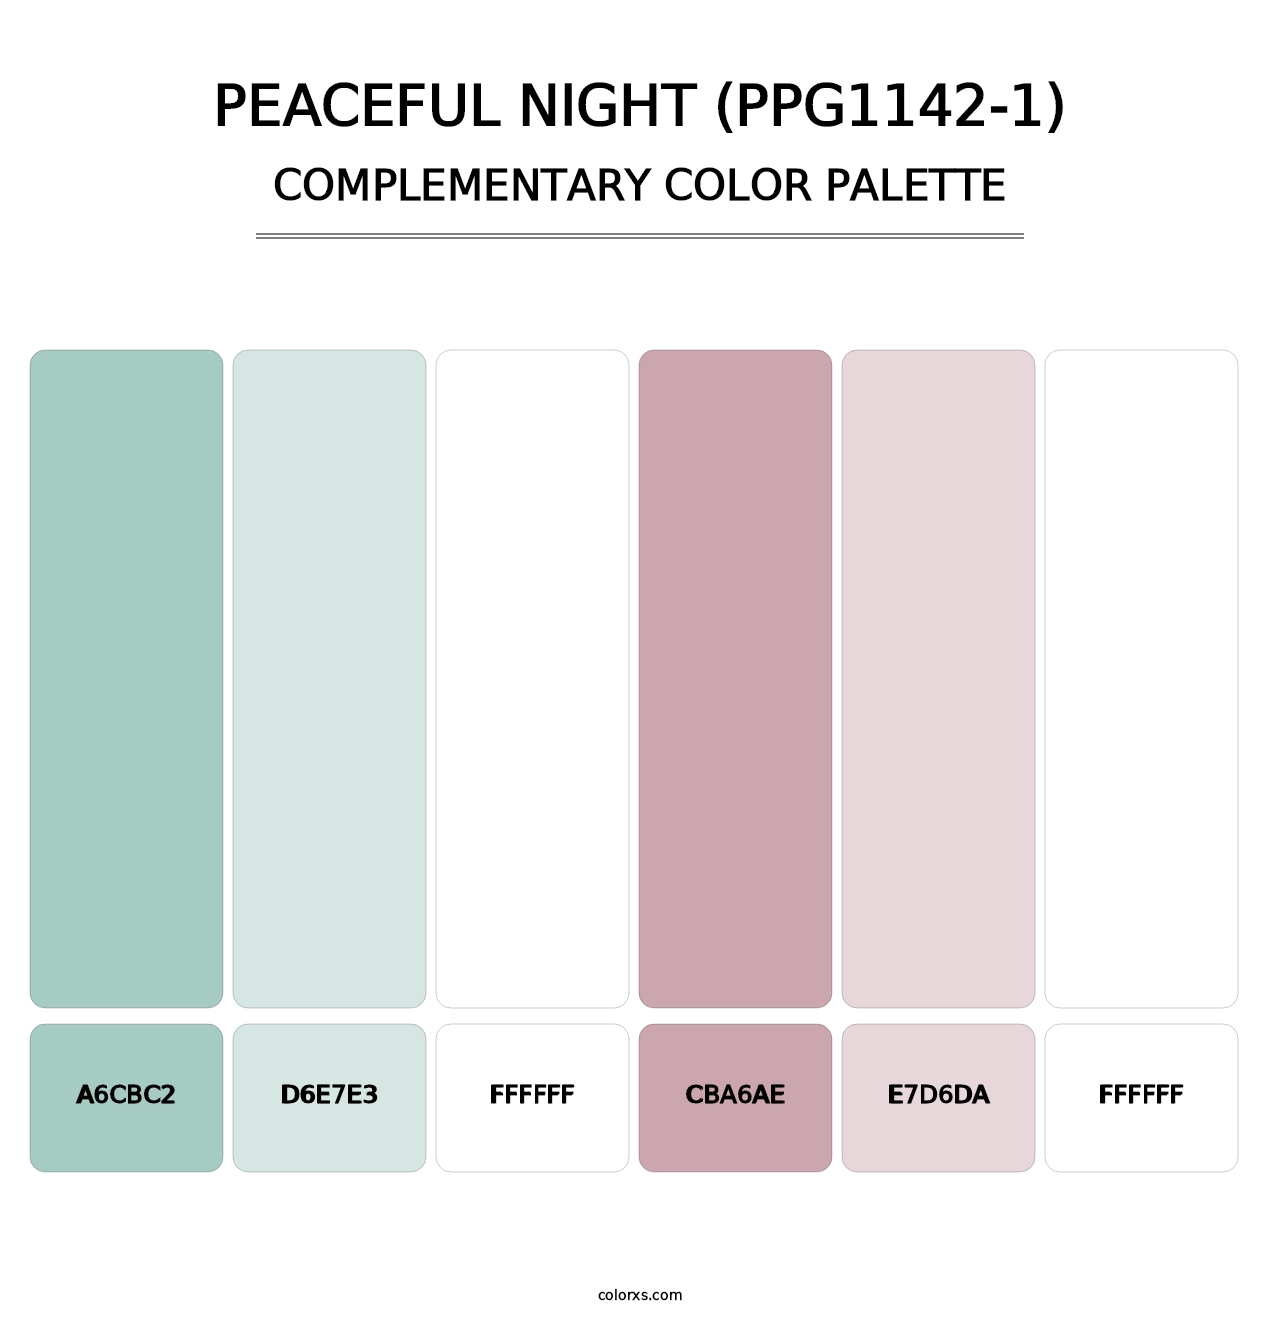 Peaceful Night (PPG1142-1) - Complementary Color Palette